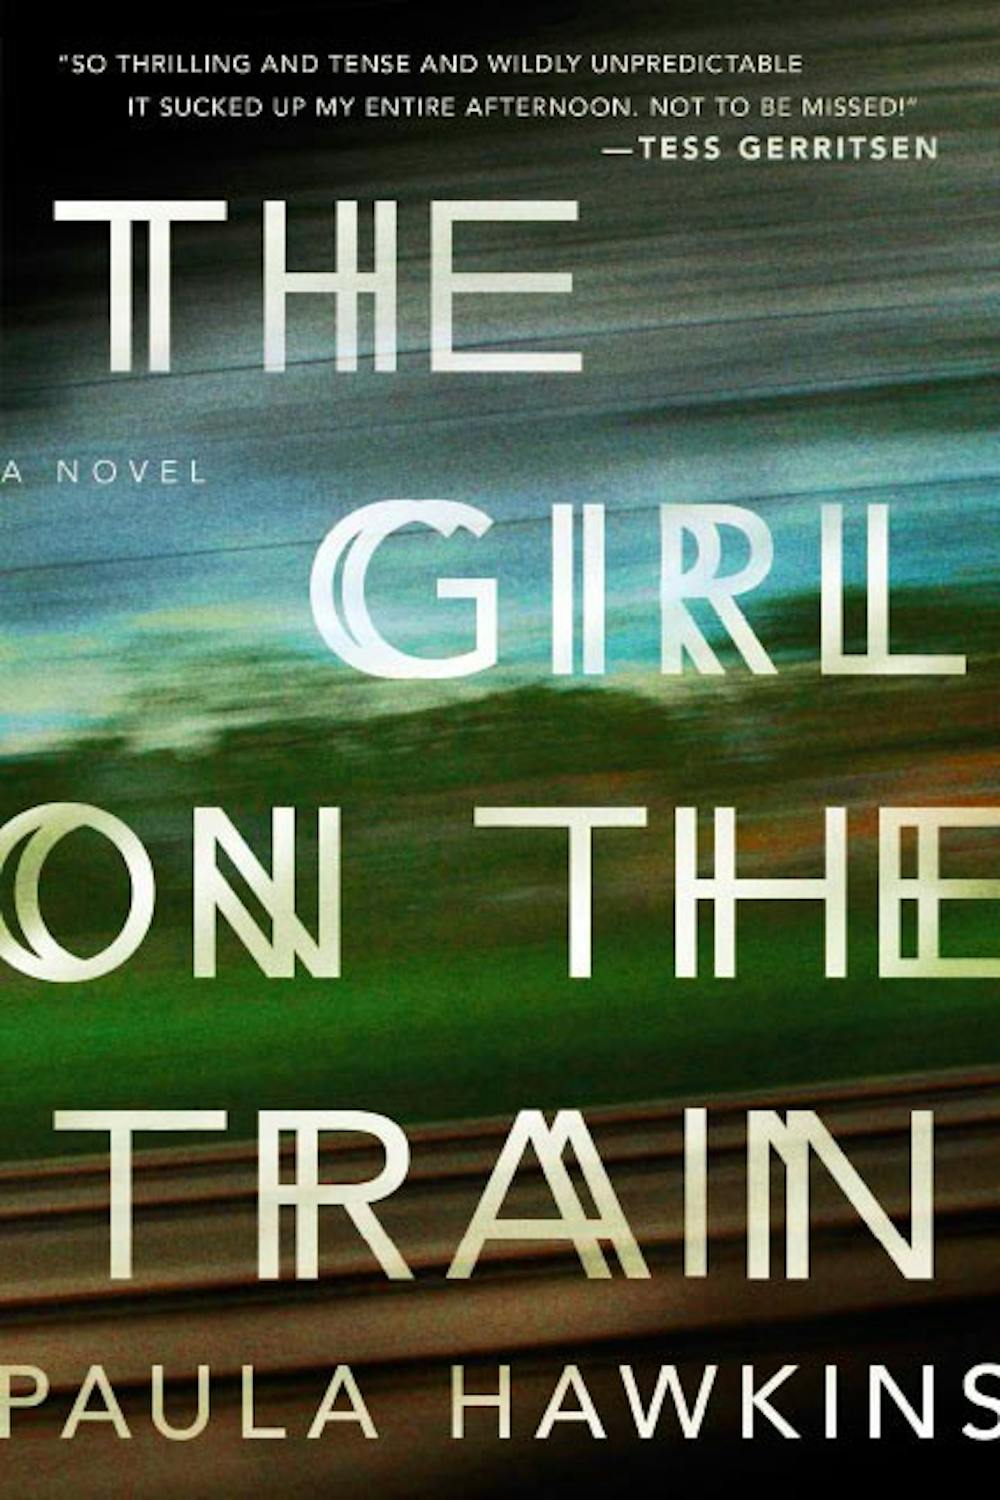 <p>The film adaptation of the widely popular novel&nbsp;"The Girl on the Train" debuts later this year.</p>